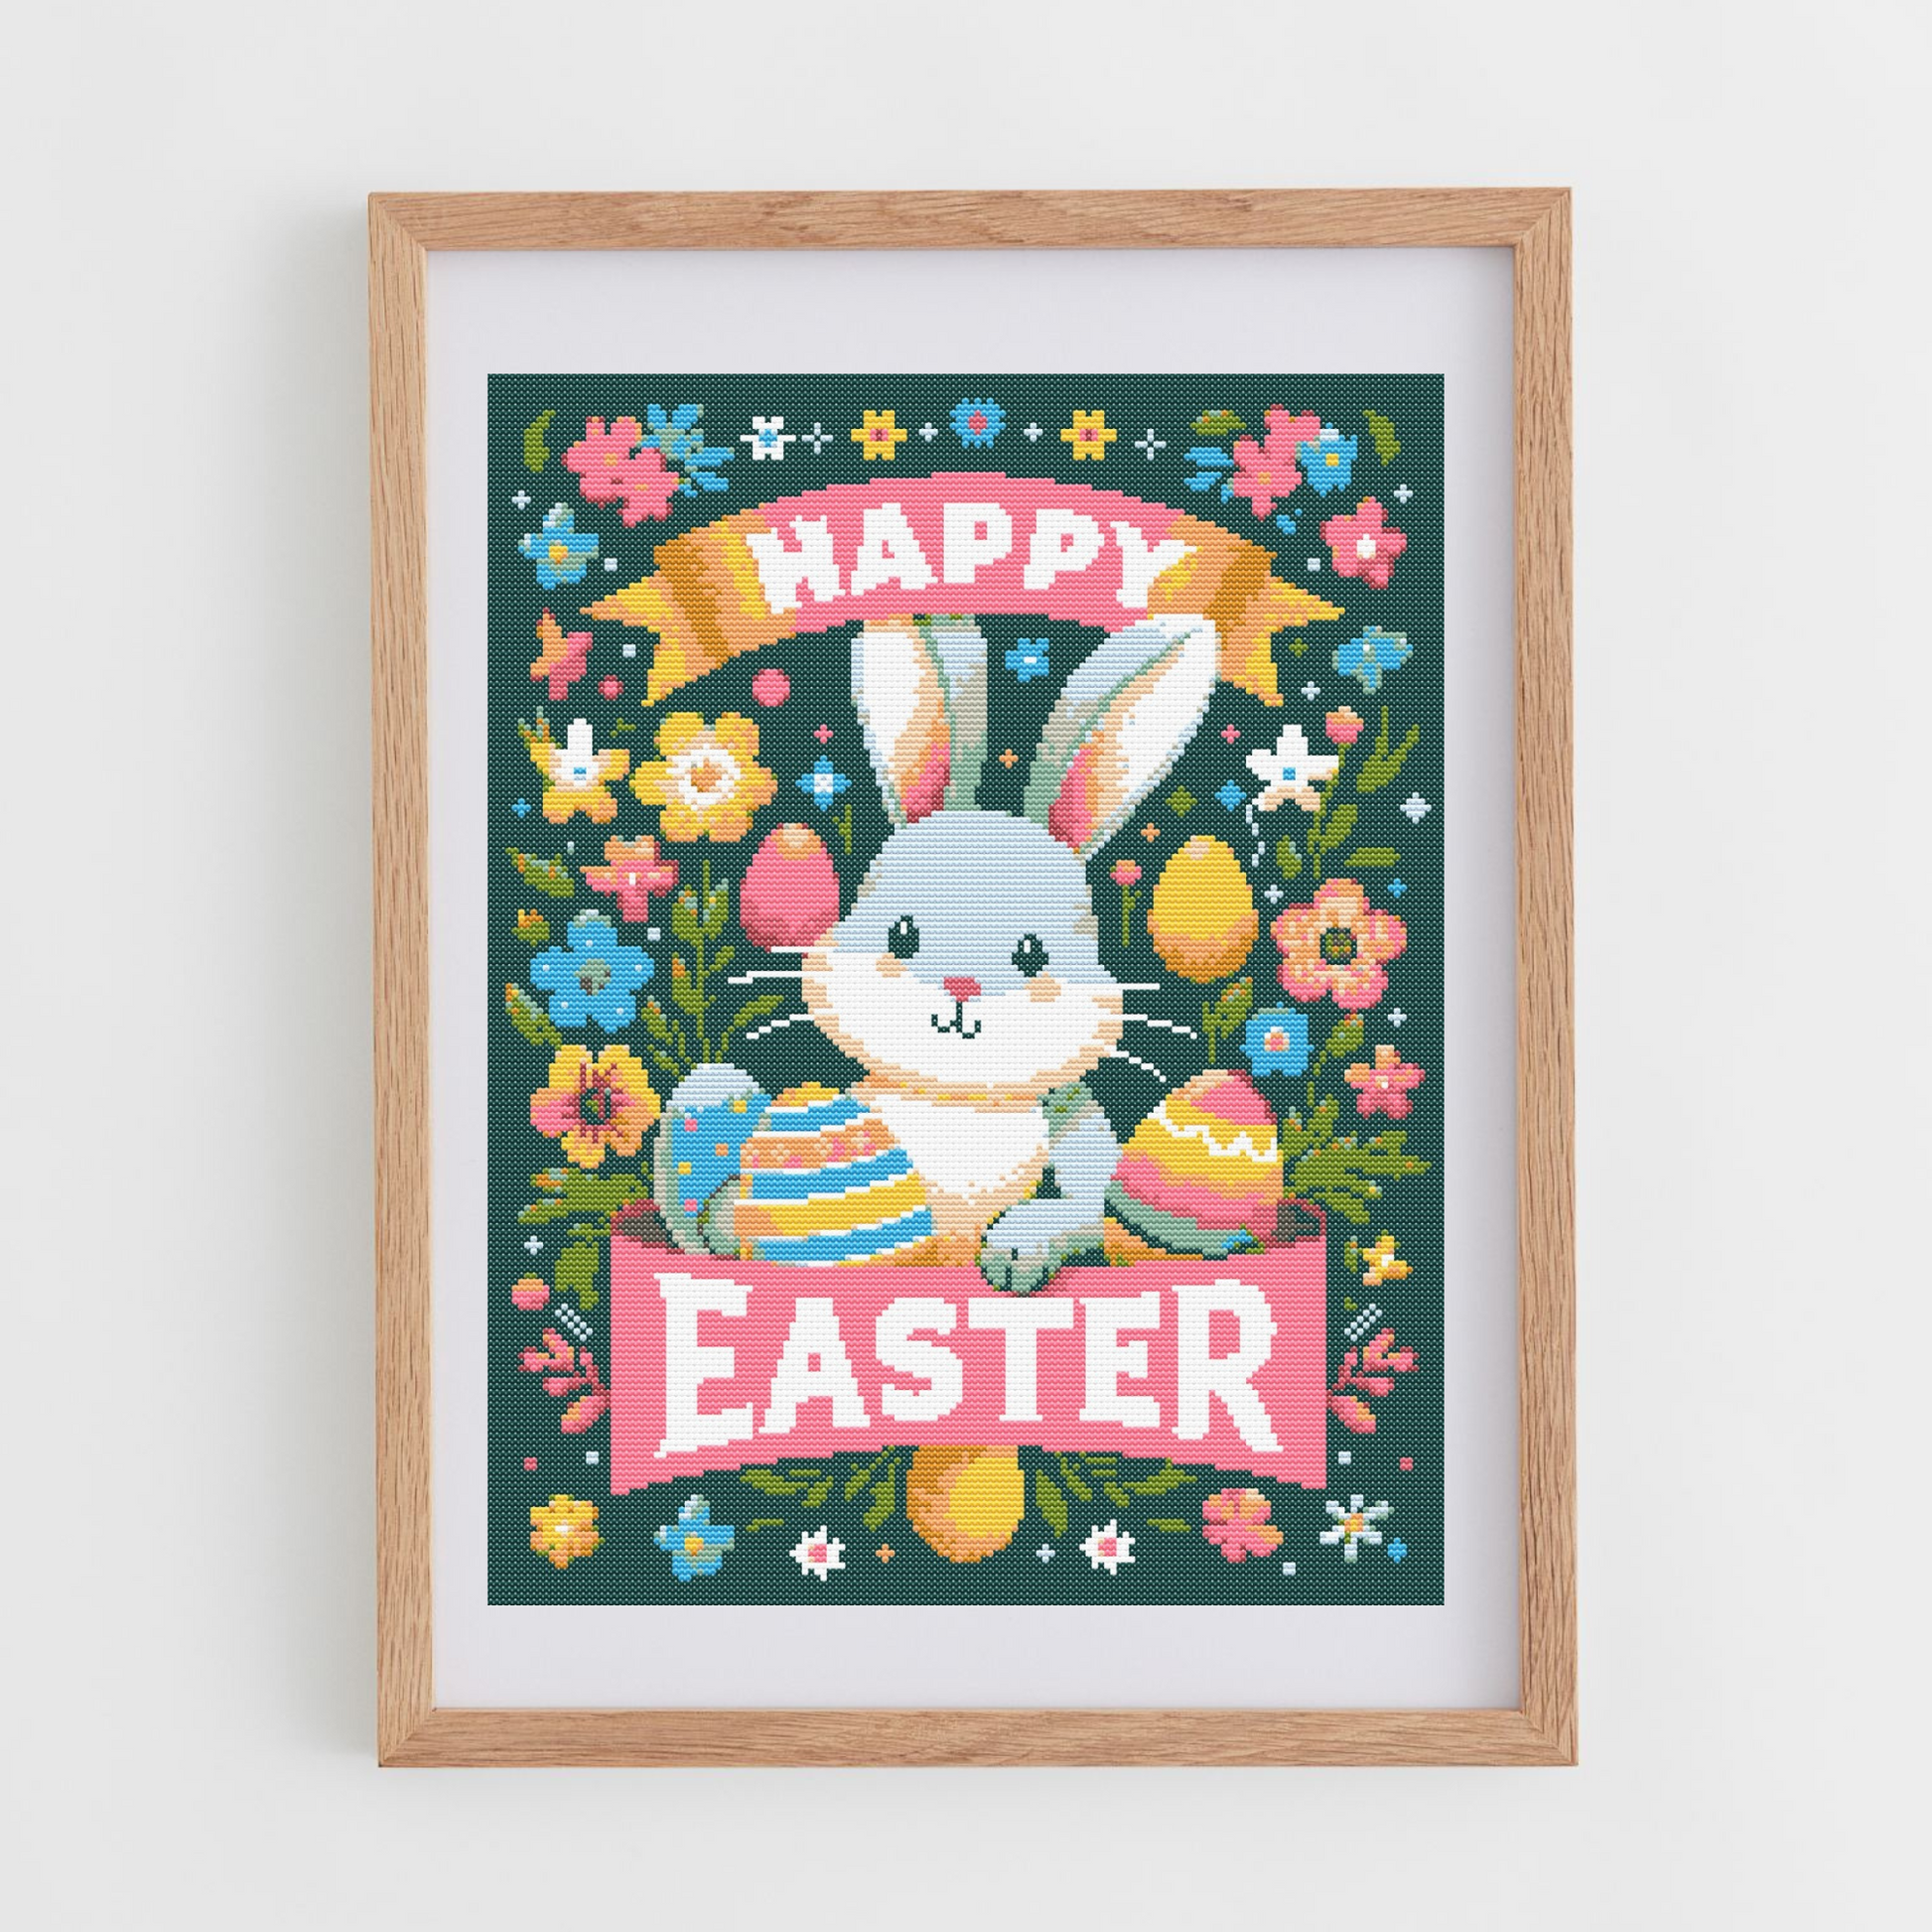 Happy Easter cross-stitch pattern PDF | Easter cross stitch charts | The Fresh Cross Stitch